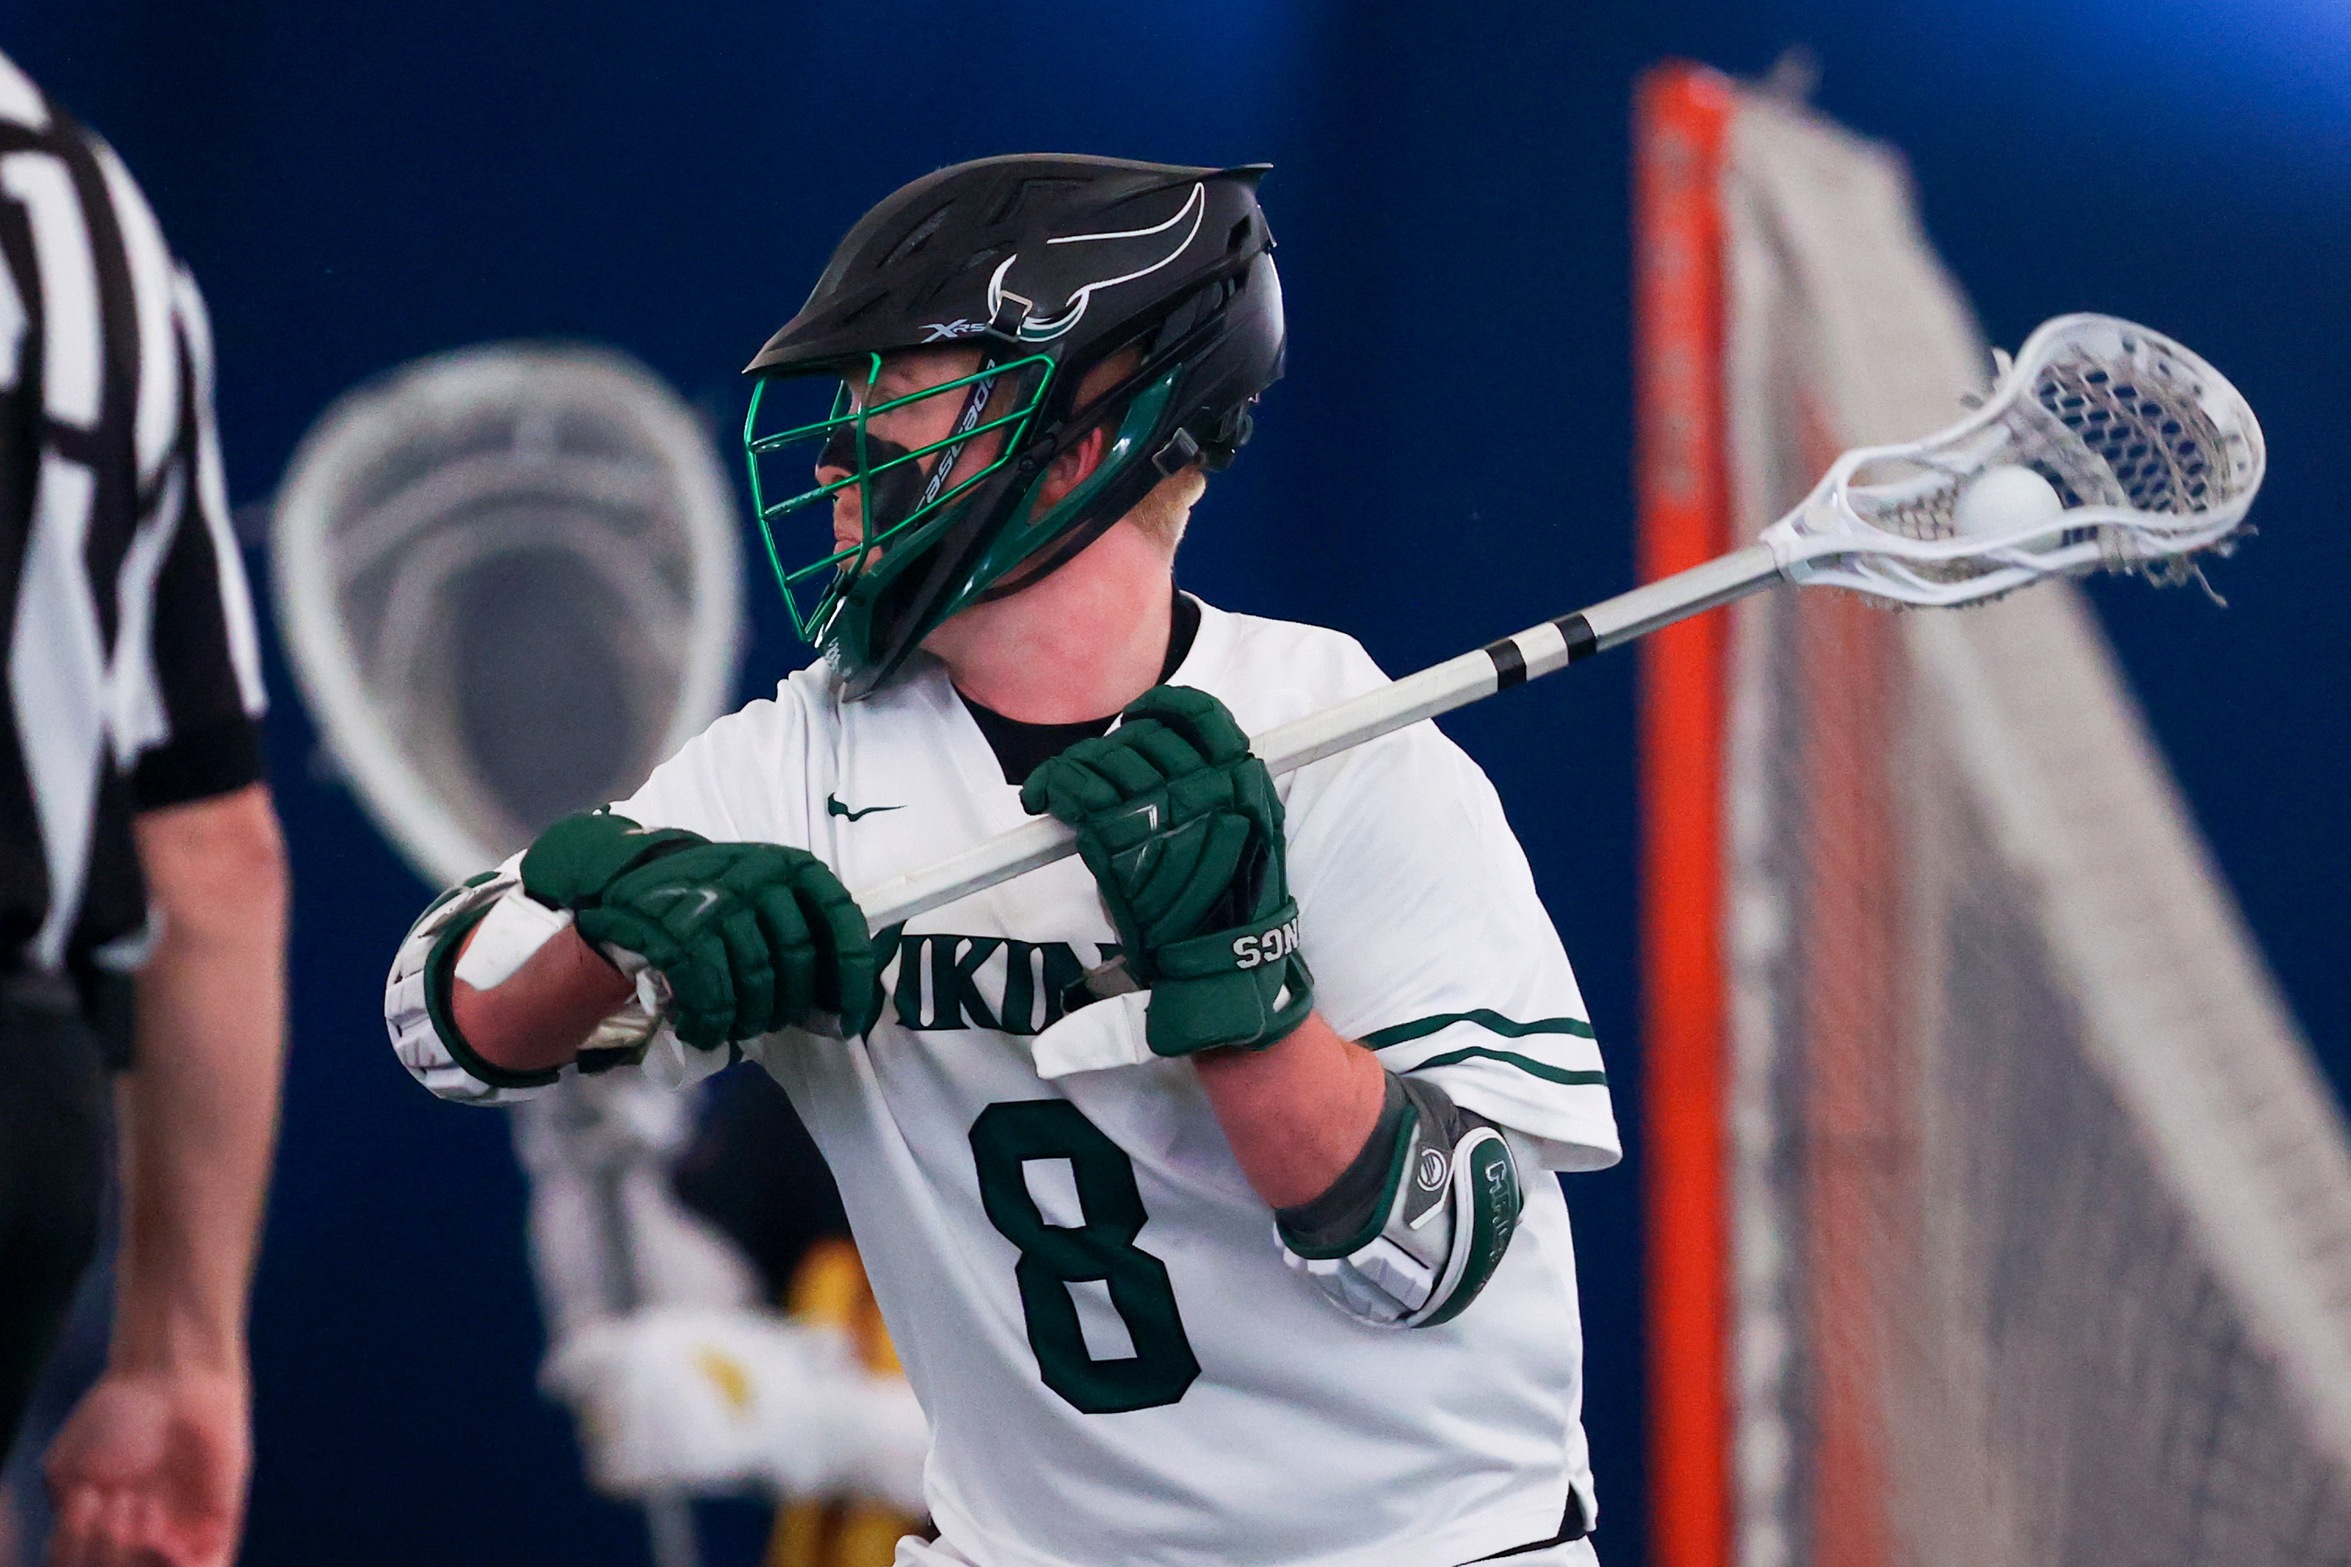 Ryan Haigh Drafted by the New York Riptide of the National Lacrosse League